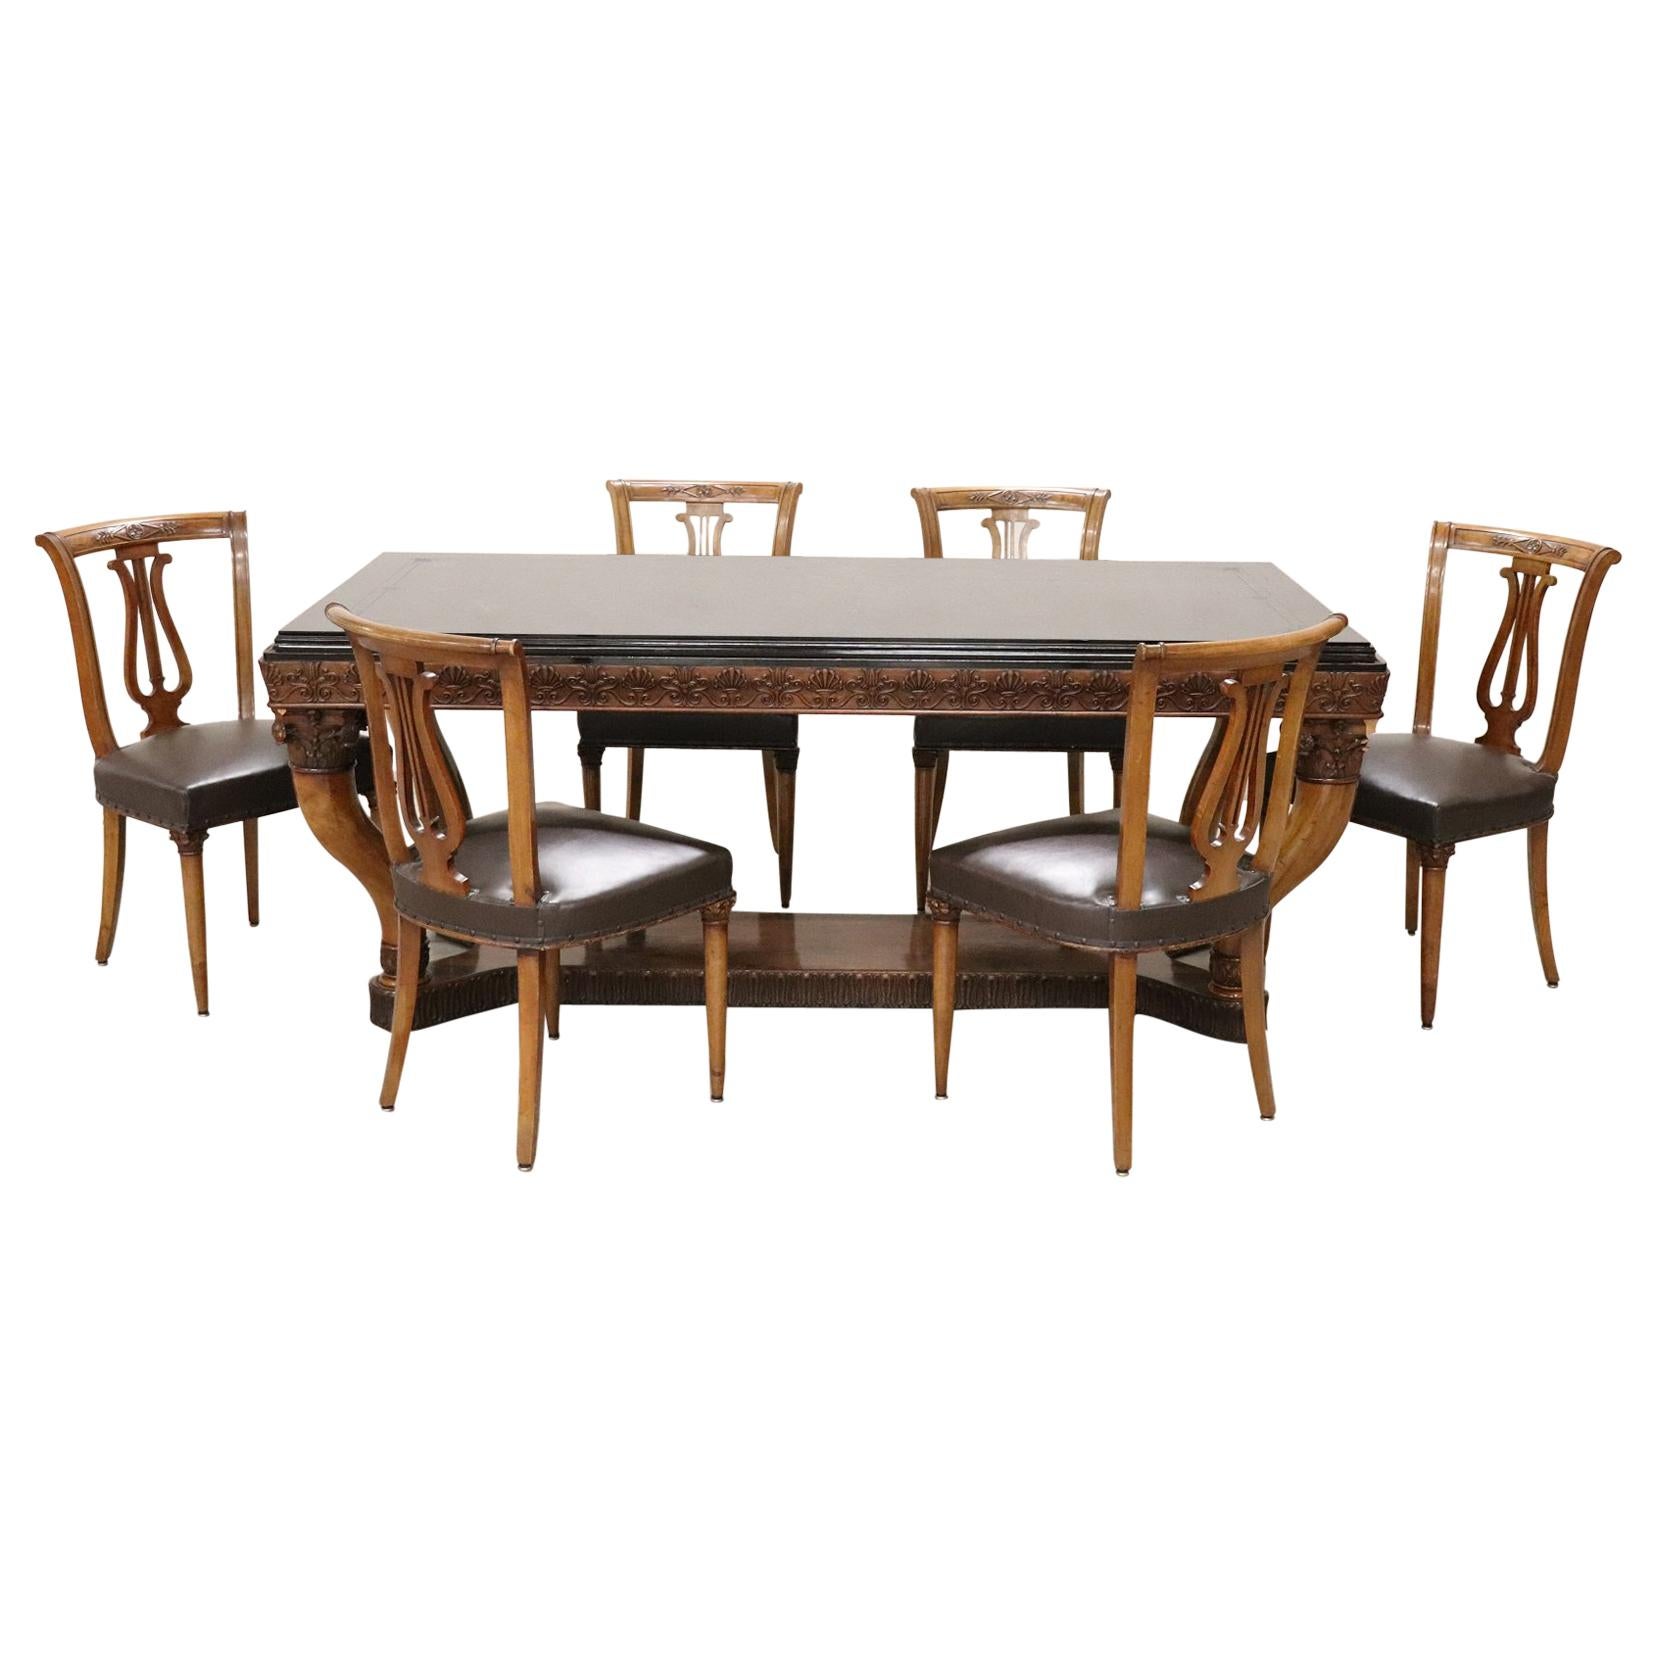 20th Century Italian Neoclassical Style Walnut Carved Dining Set 7 Pieces